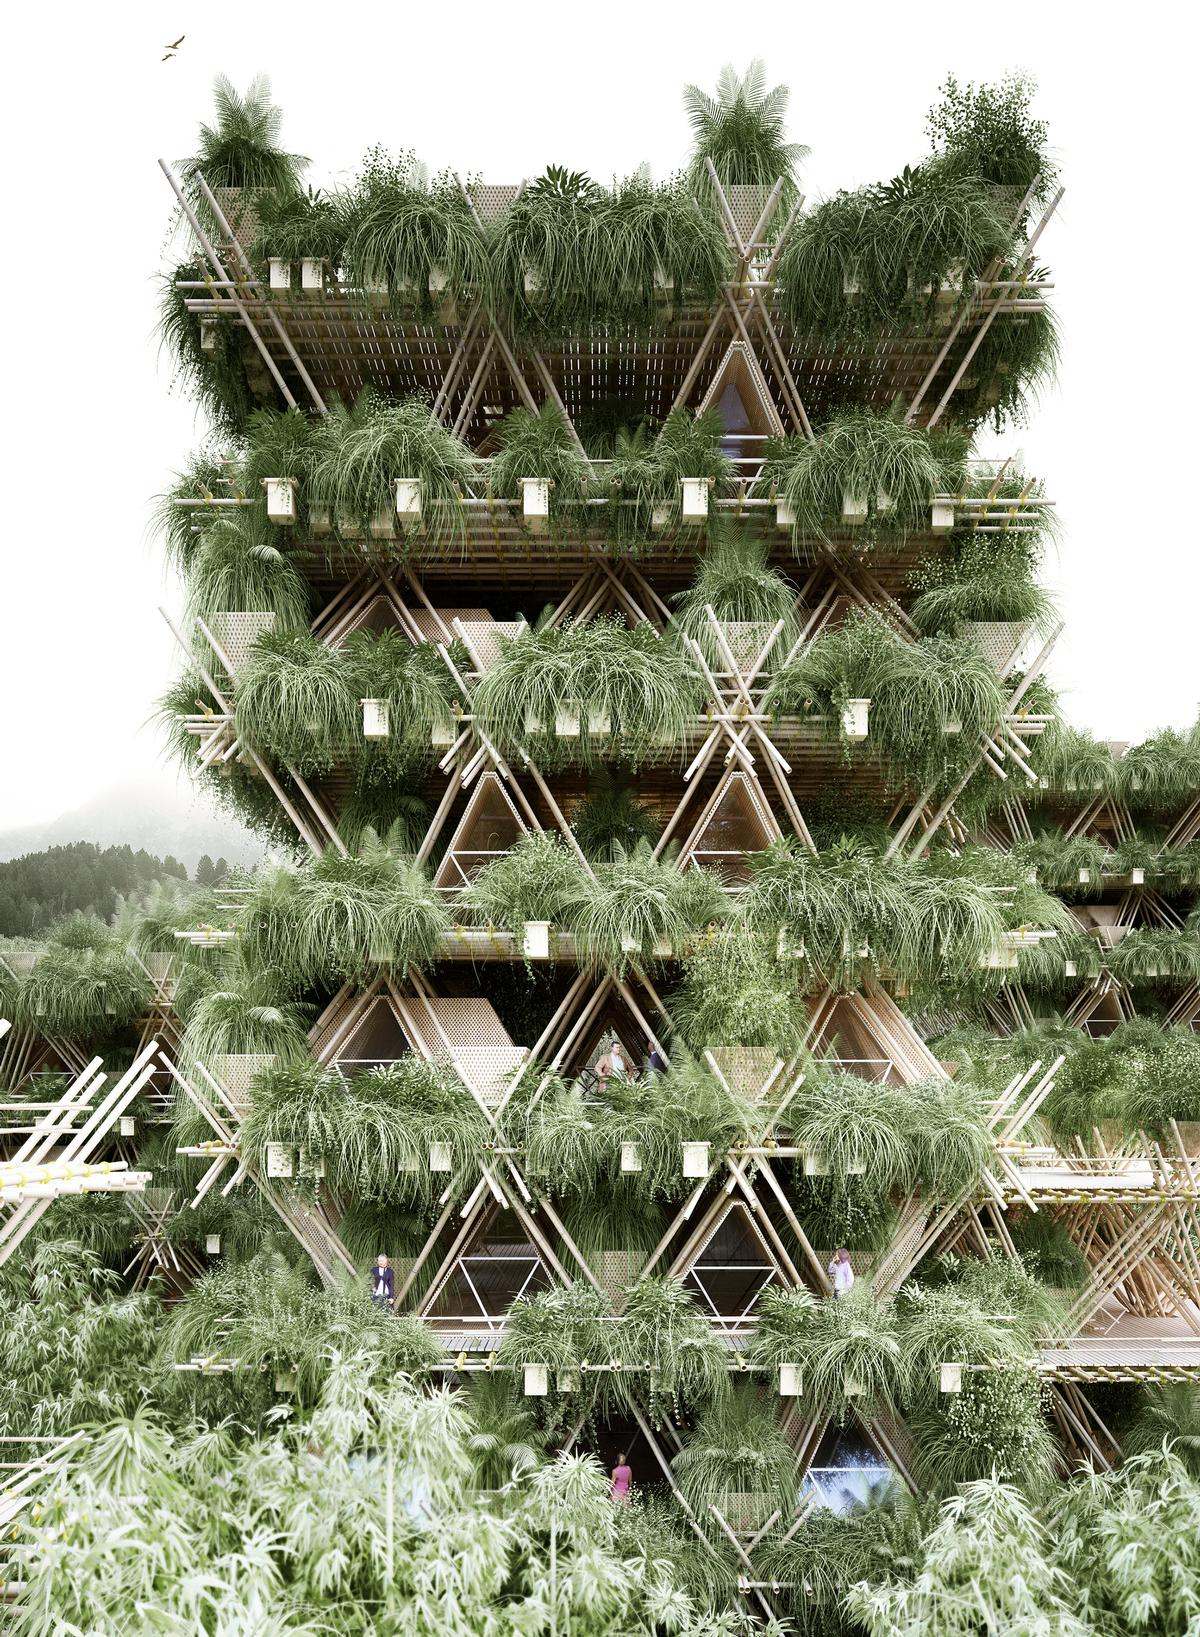 Bamboo bound with rope can create hotels, homes, bridges, floating structures and public space / Penda